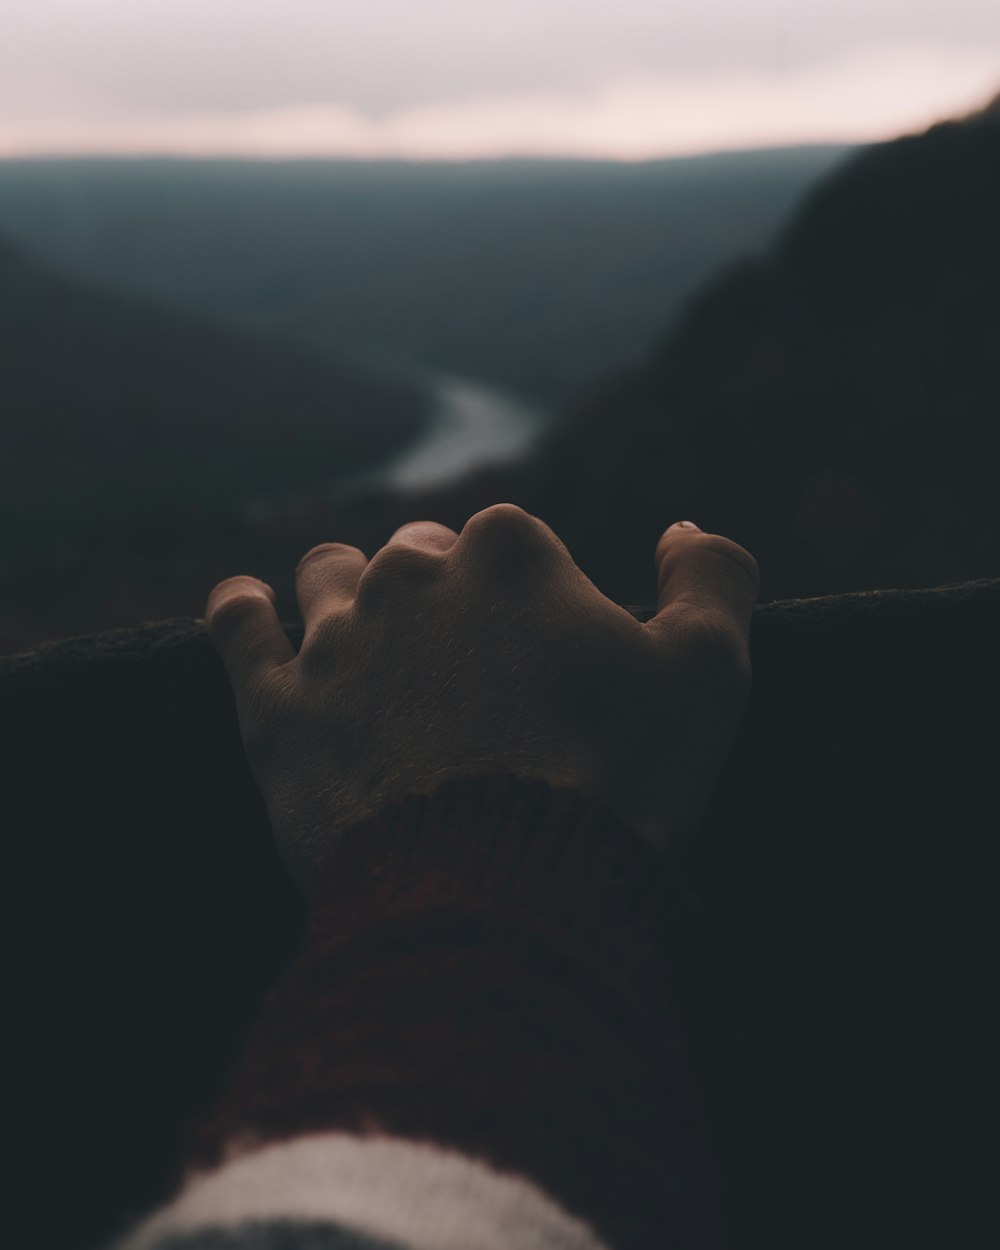 person's hand holding railings overlooking winding river